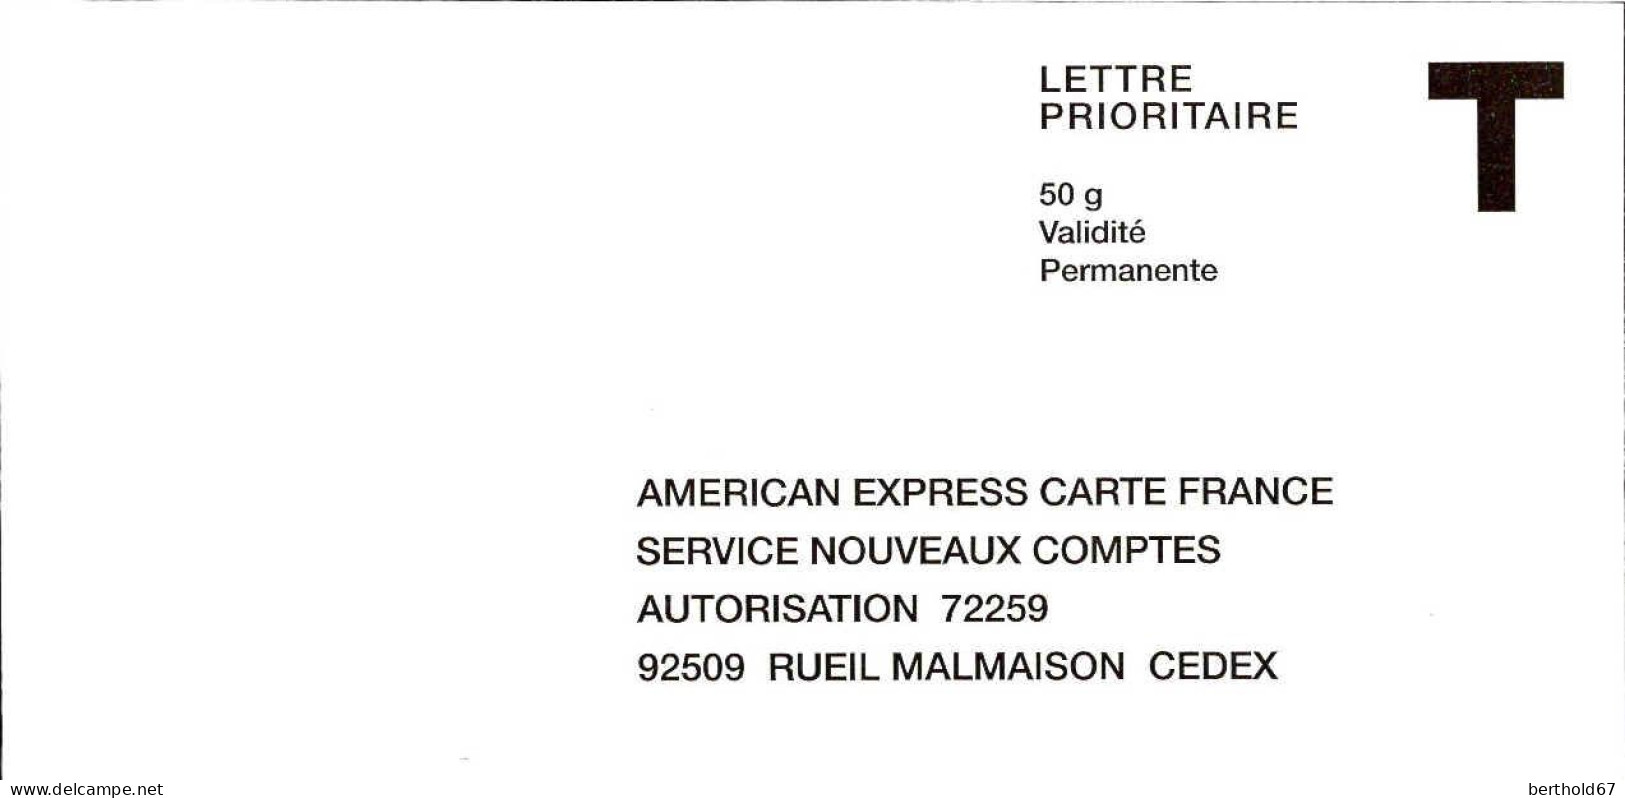 France Entier-P N** (7007) American Express Carte France Lettre Prioritaire 50g V.perma - Cards/T Return Covers